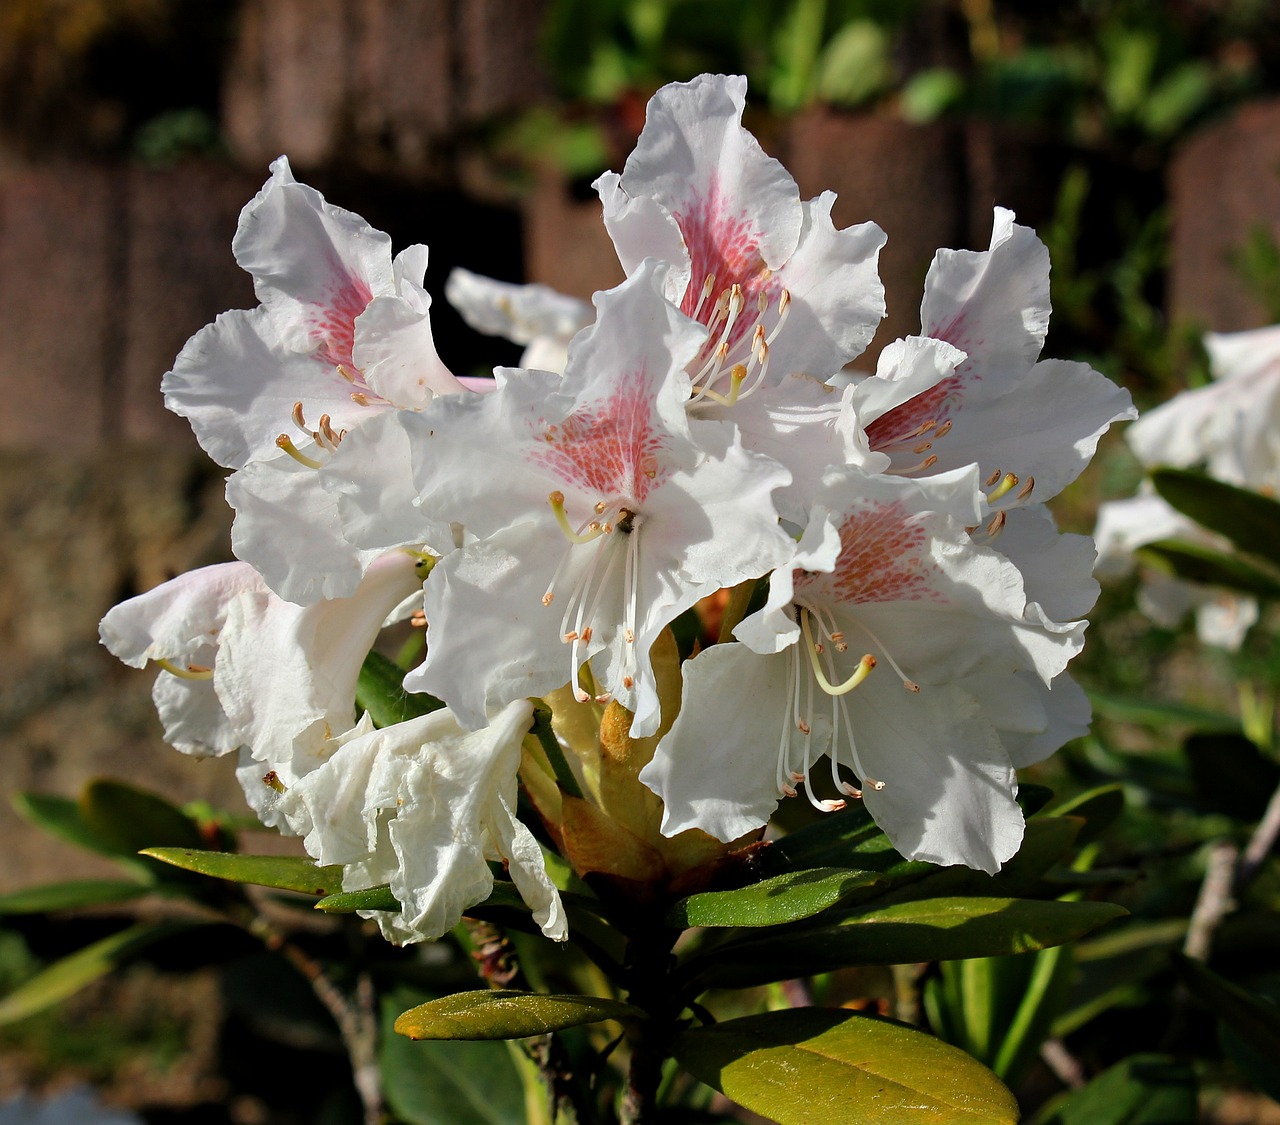 Rhododendron Alfred na tle zielonych liści